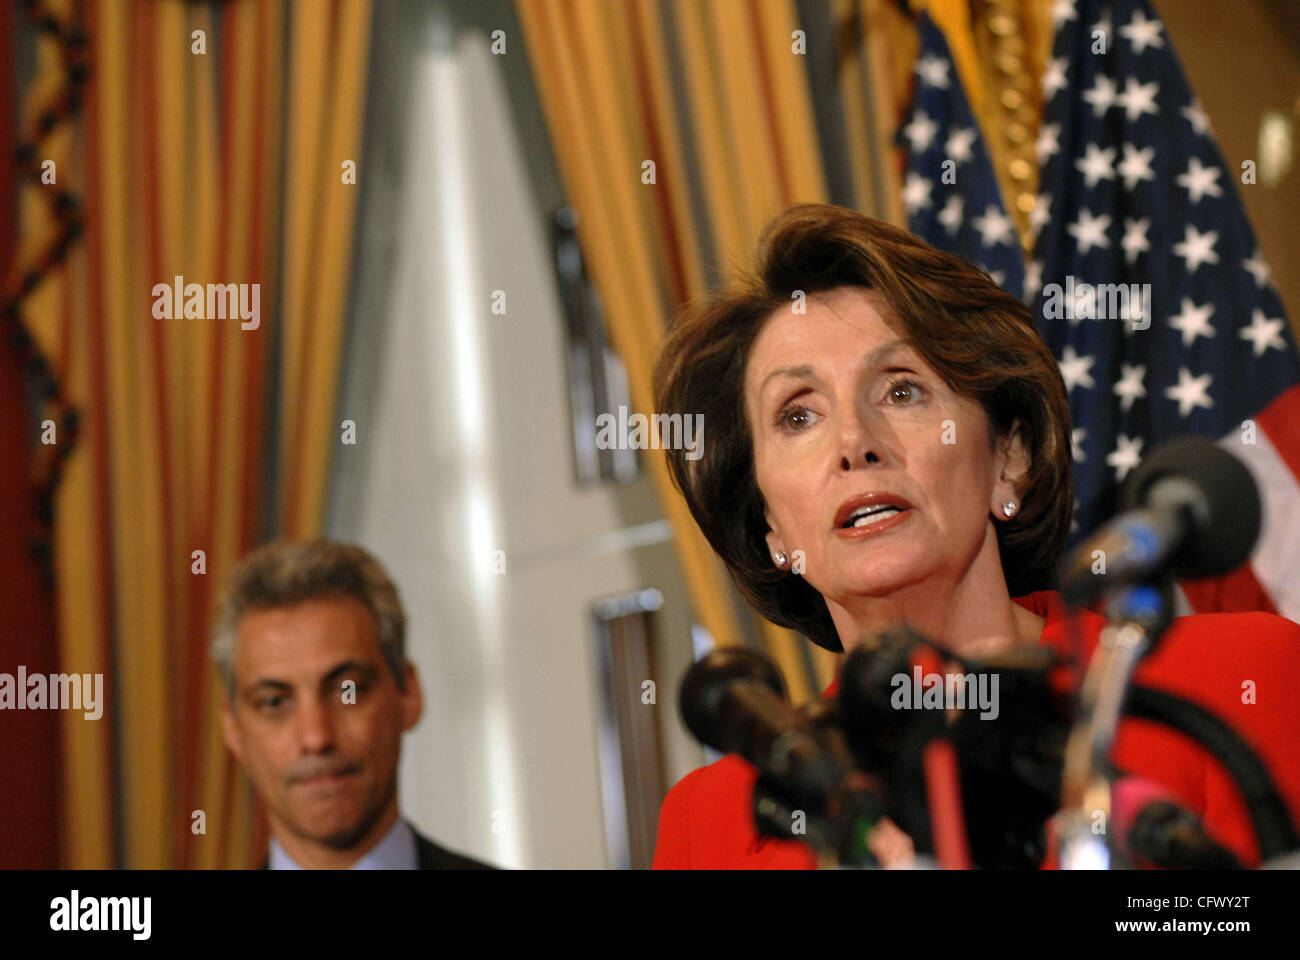 Mar 13, 2007 - Washington, DC, USA - Speaker of the House NANCY PELOSI (D-CA) and the Democratic House leadership team, including RAHM EMANUEL (D-IL), behind Pelosi, meets with reporters to discuss new and upcoming 'accountability legislation,' which House Democrats tout as exercising Congress' chec Stock Photo